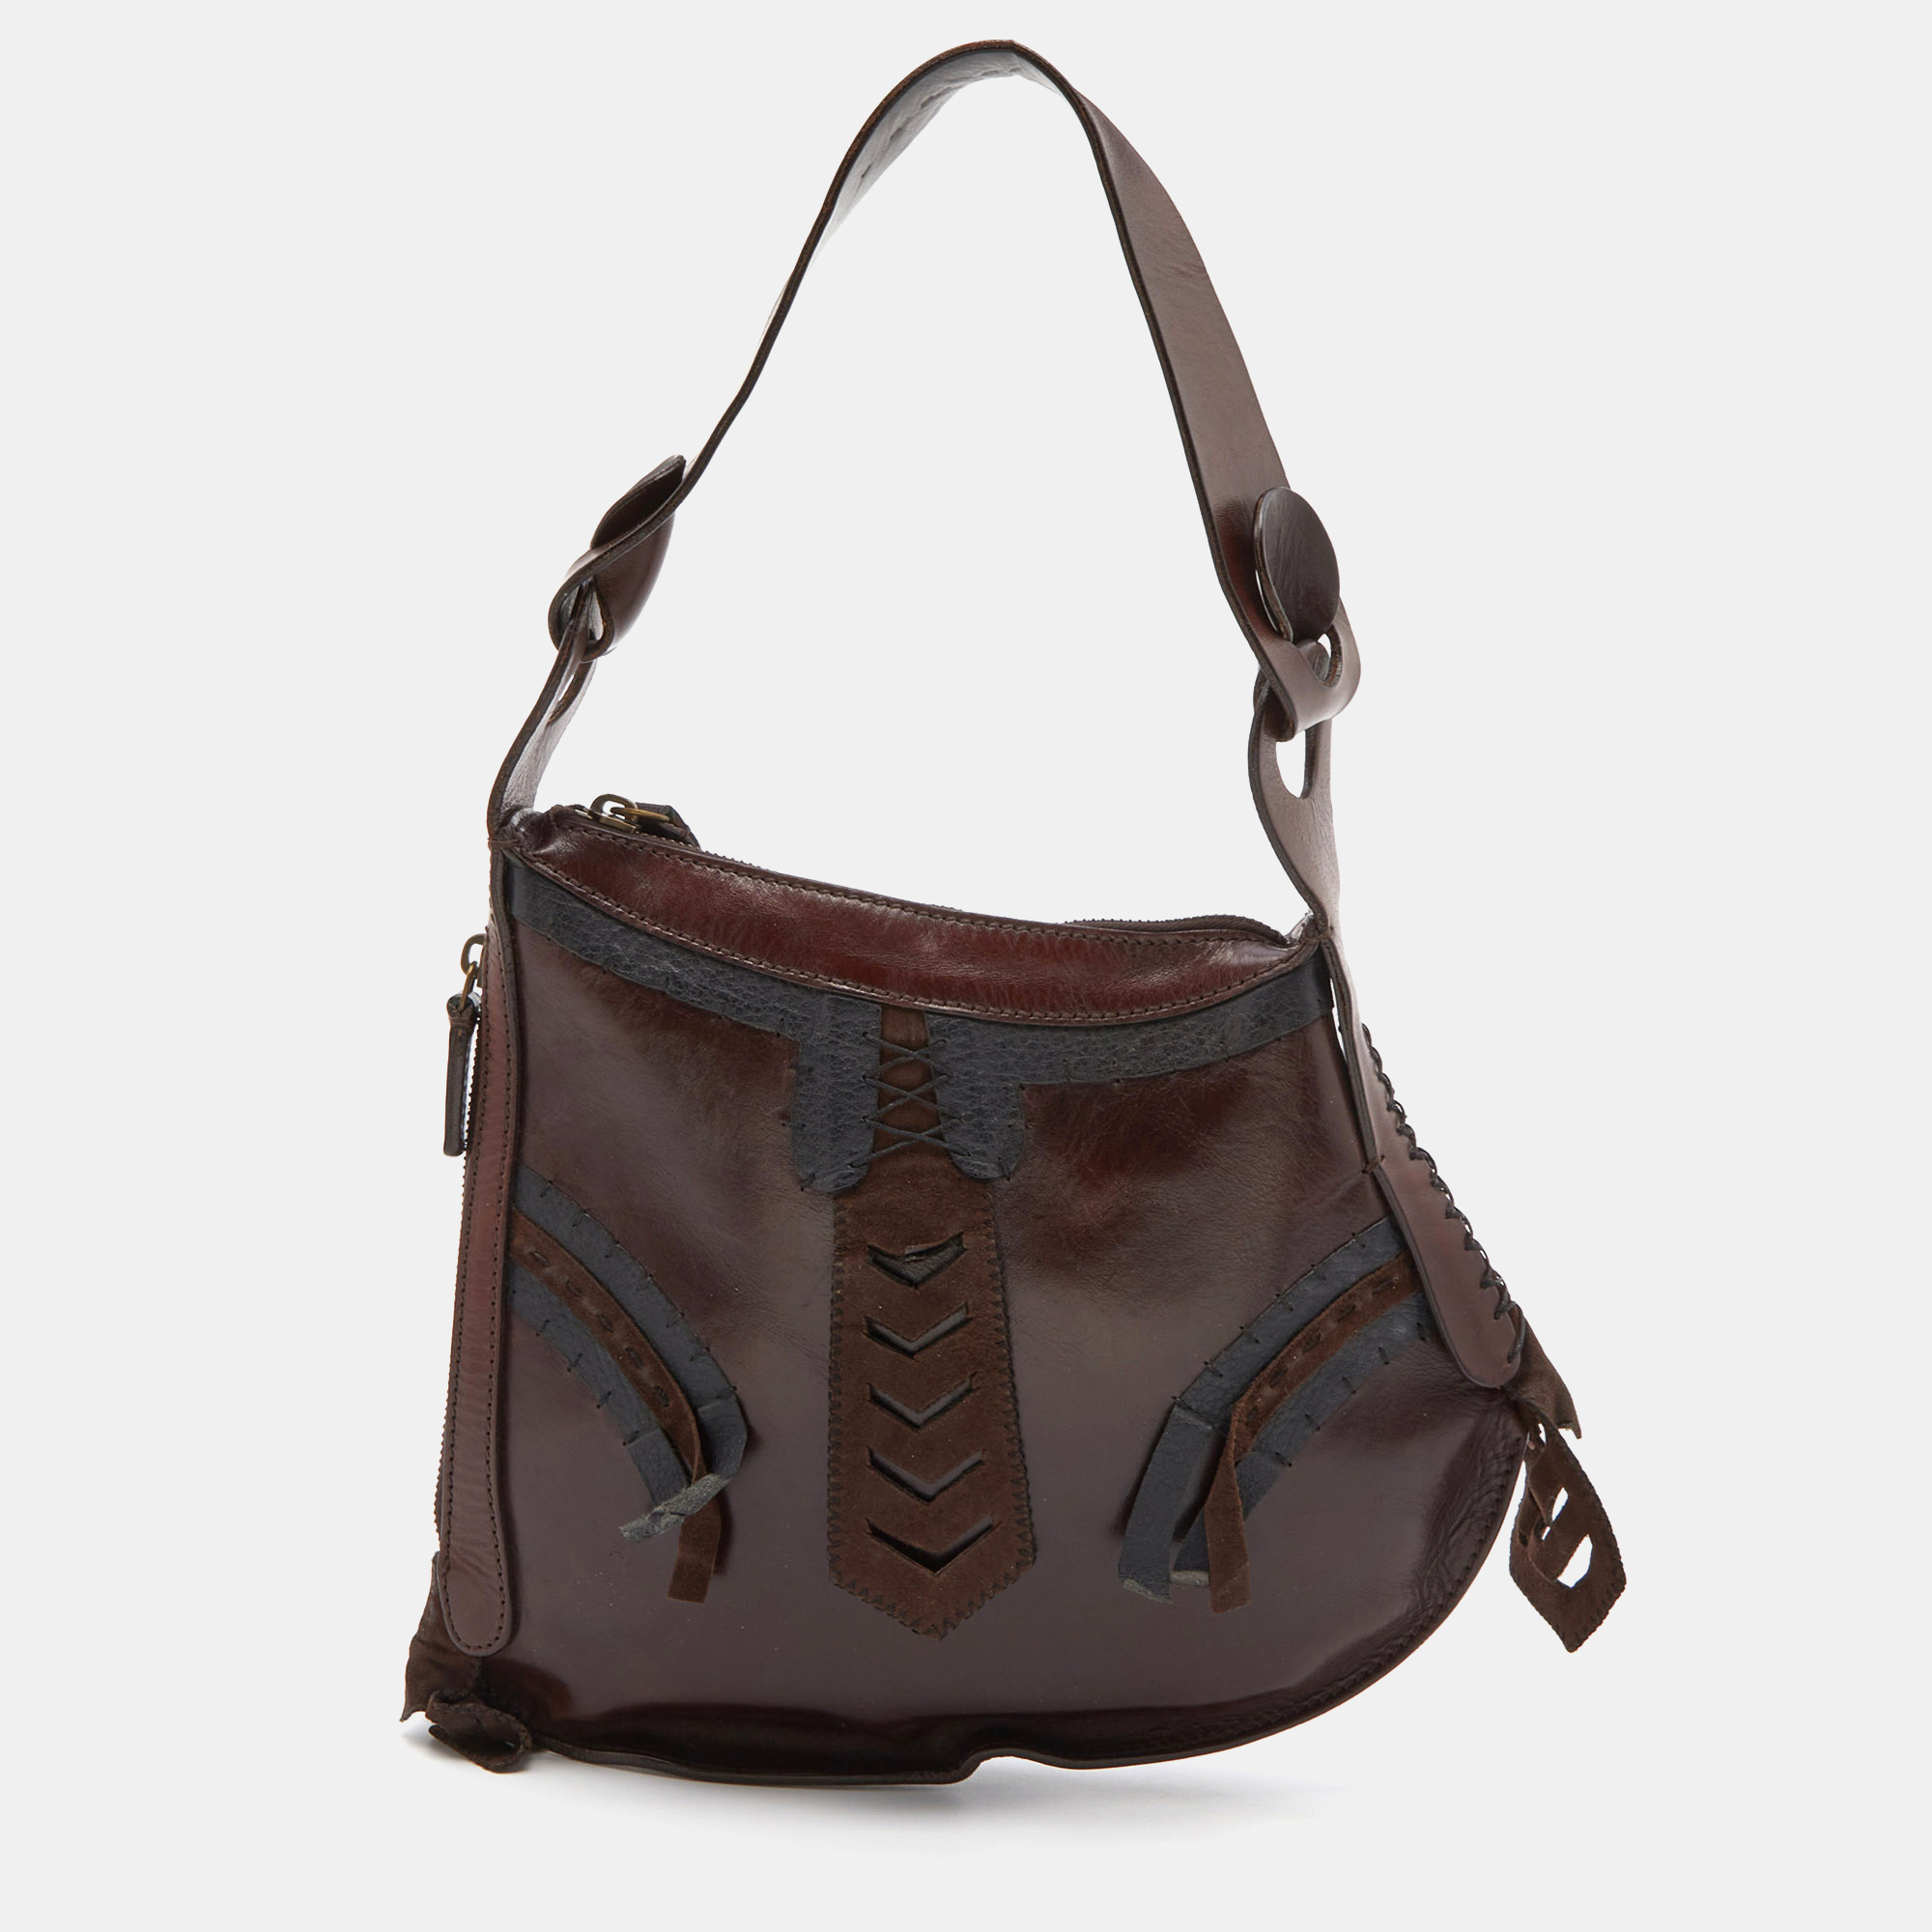 Fendi Brown Leather Oyster Hobo